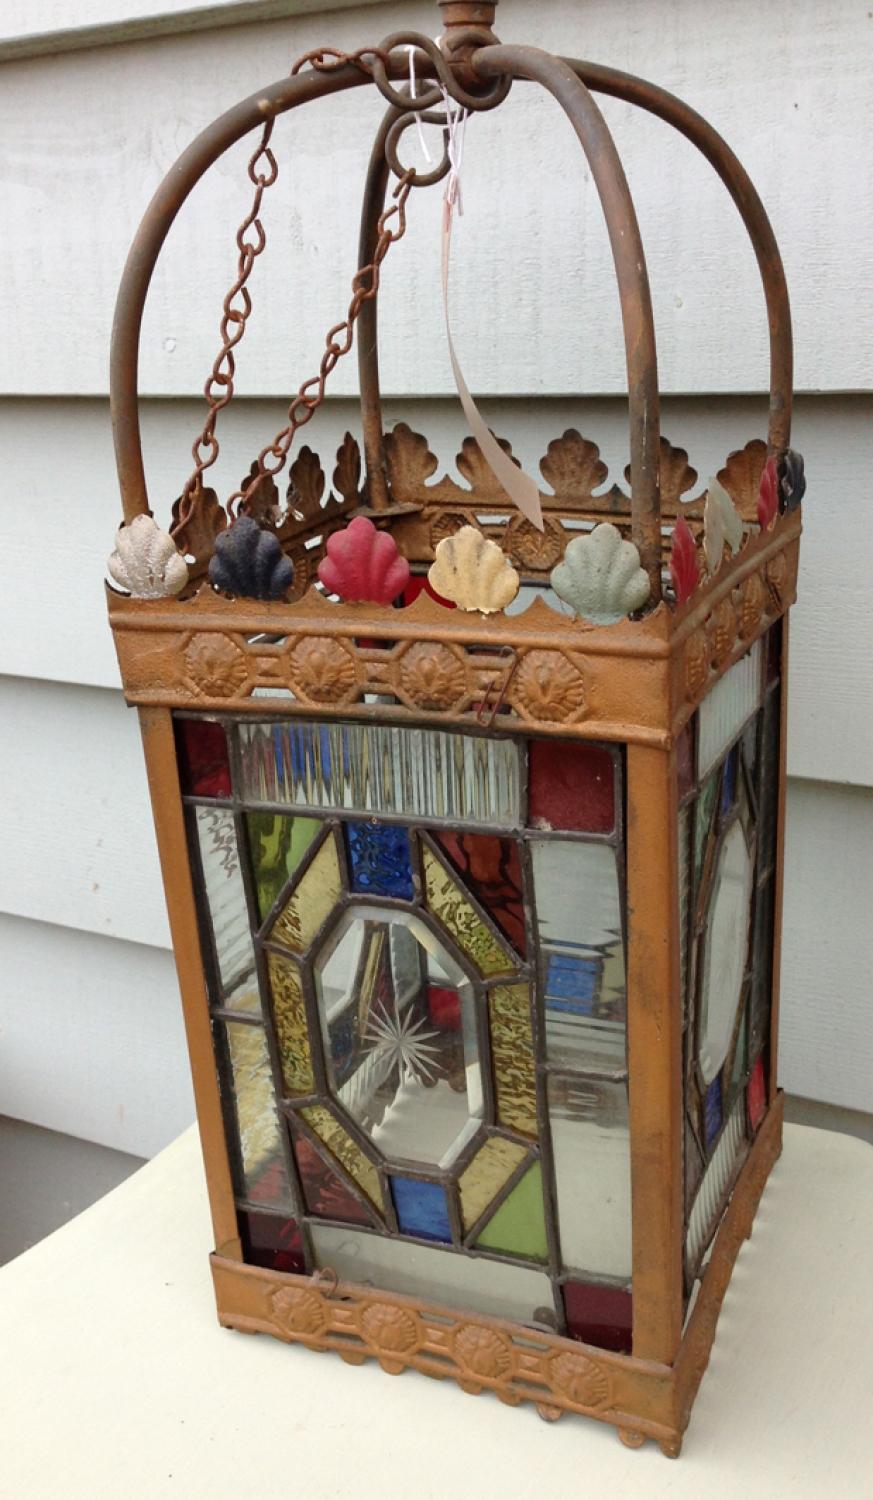 Victorian Stained Glass Hall Lantern